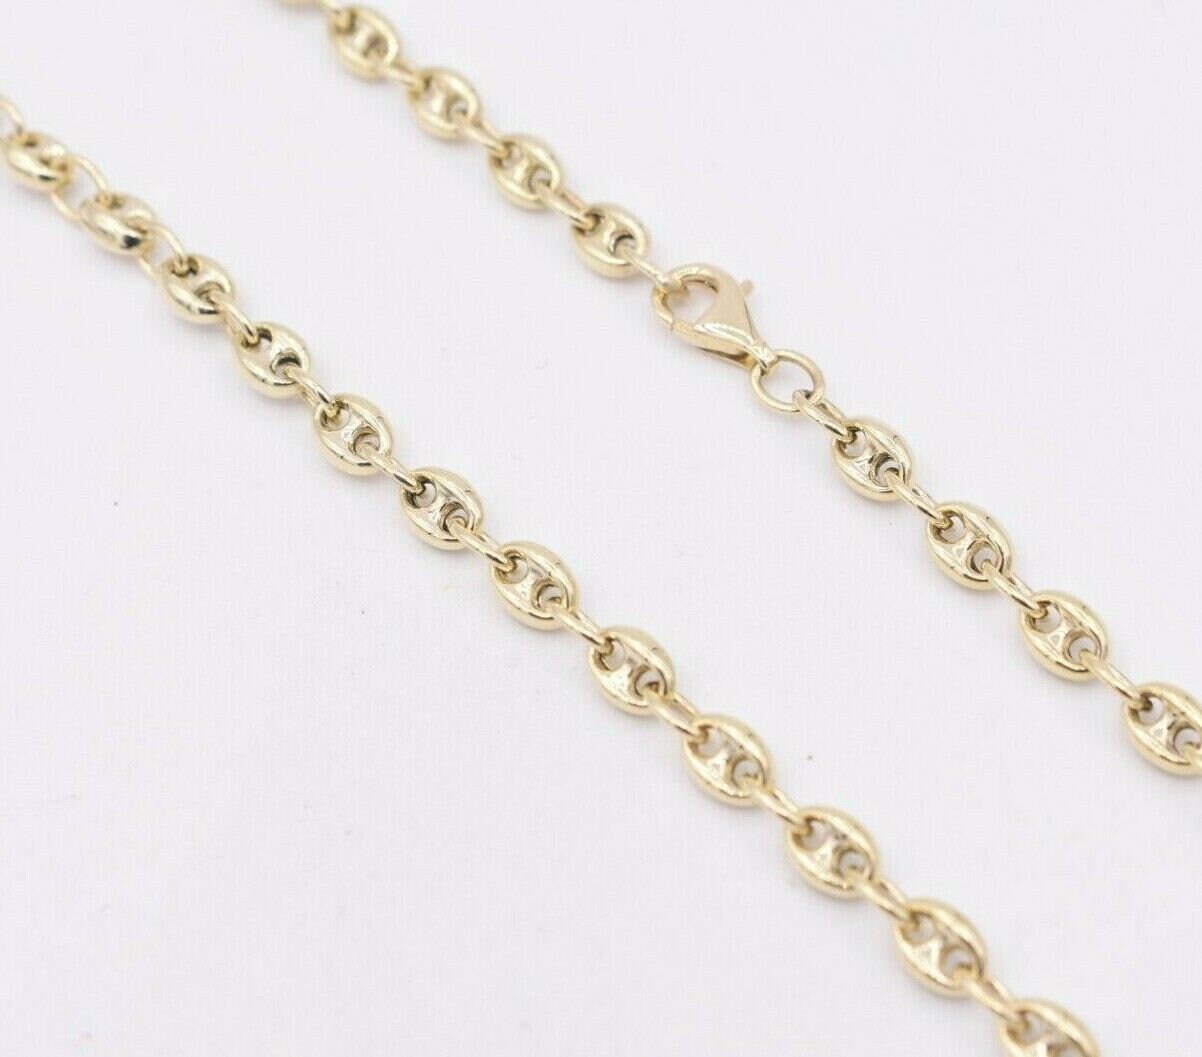 4mm Puffed Mariner Anchor Link Chain Necklace REAL Solid 10K - Etsy